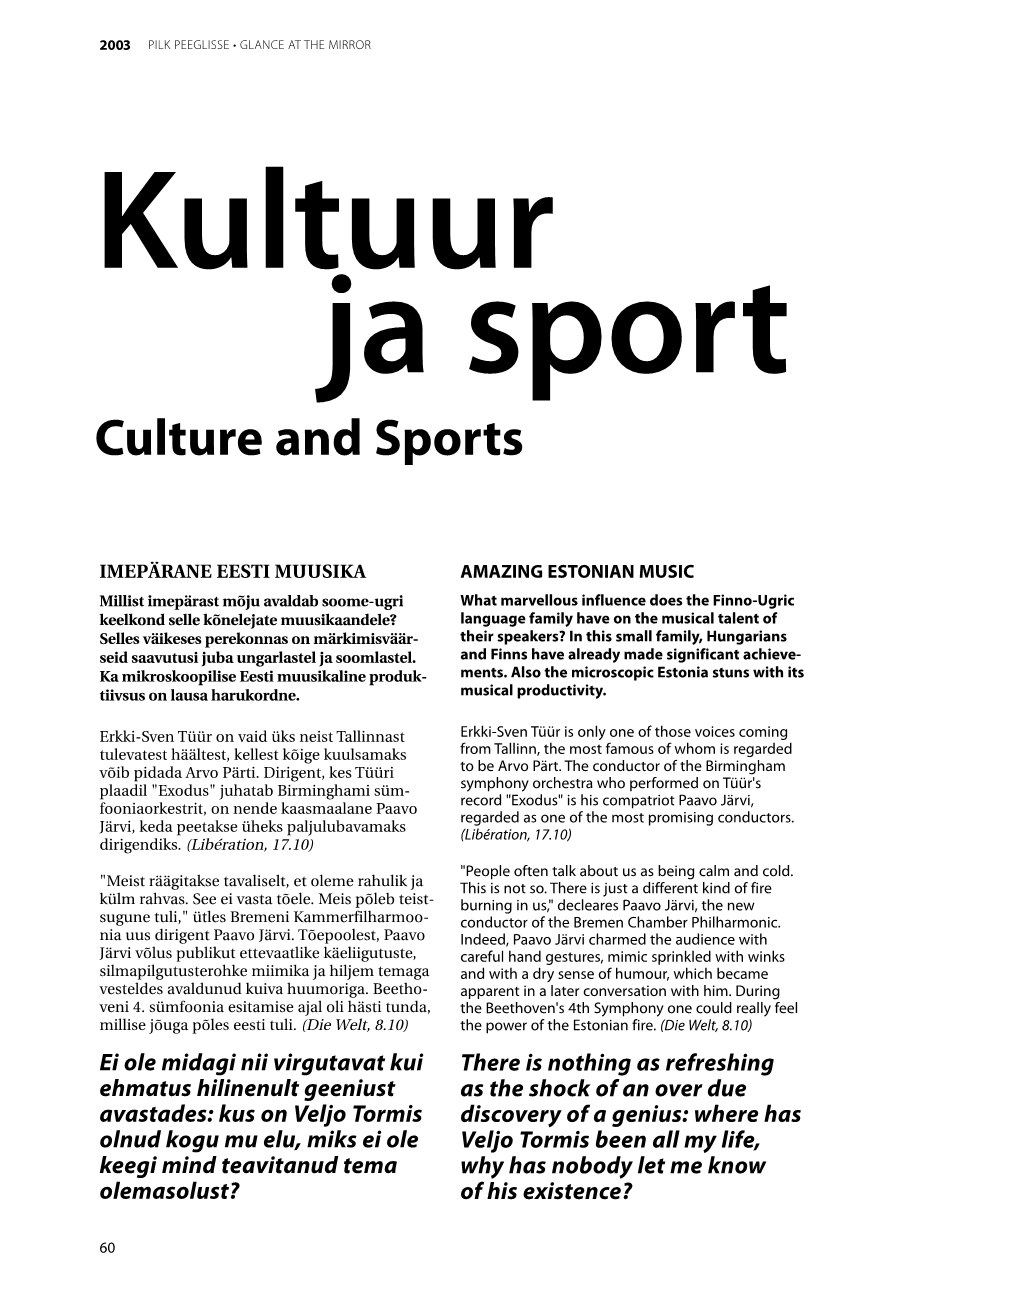 Culture and Sports